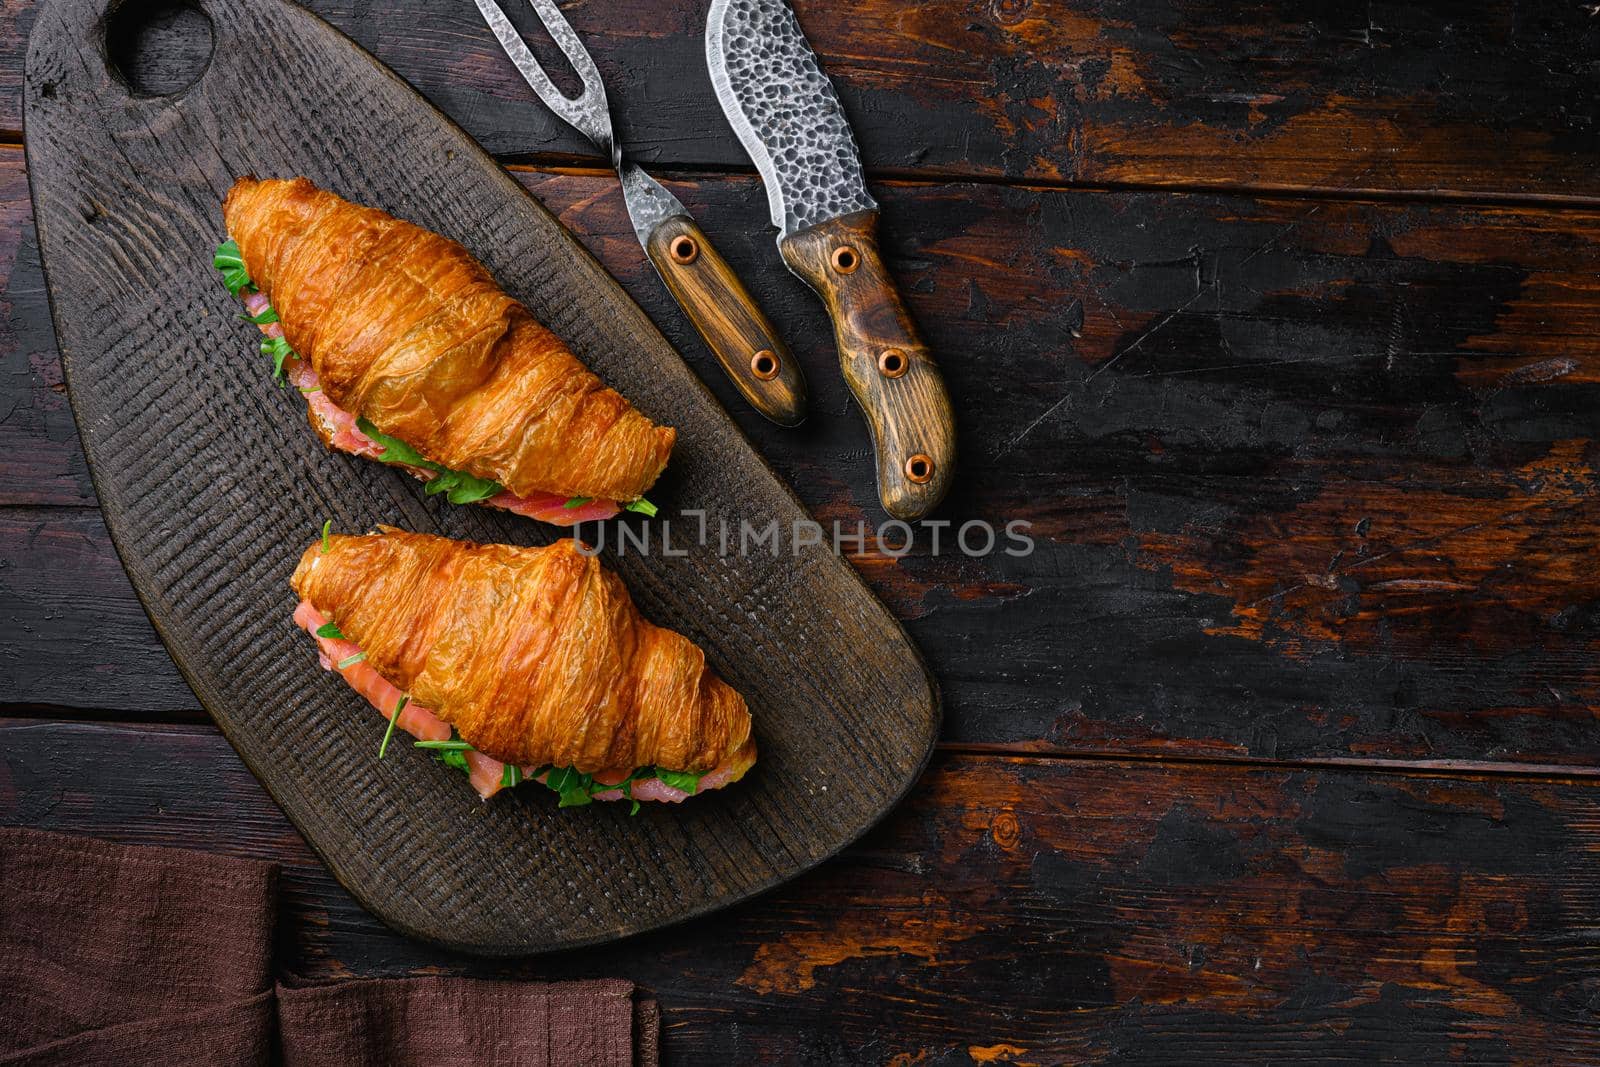 Croissant sandwich with salted salmon, on old dark wooden table background, top view flat lay, with copy space for text by Ilianesolenyi